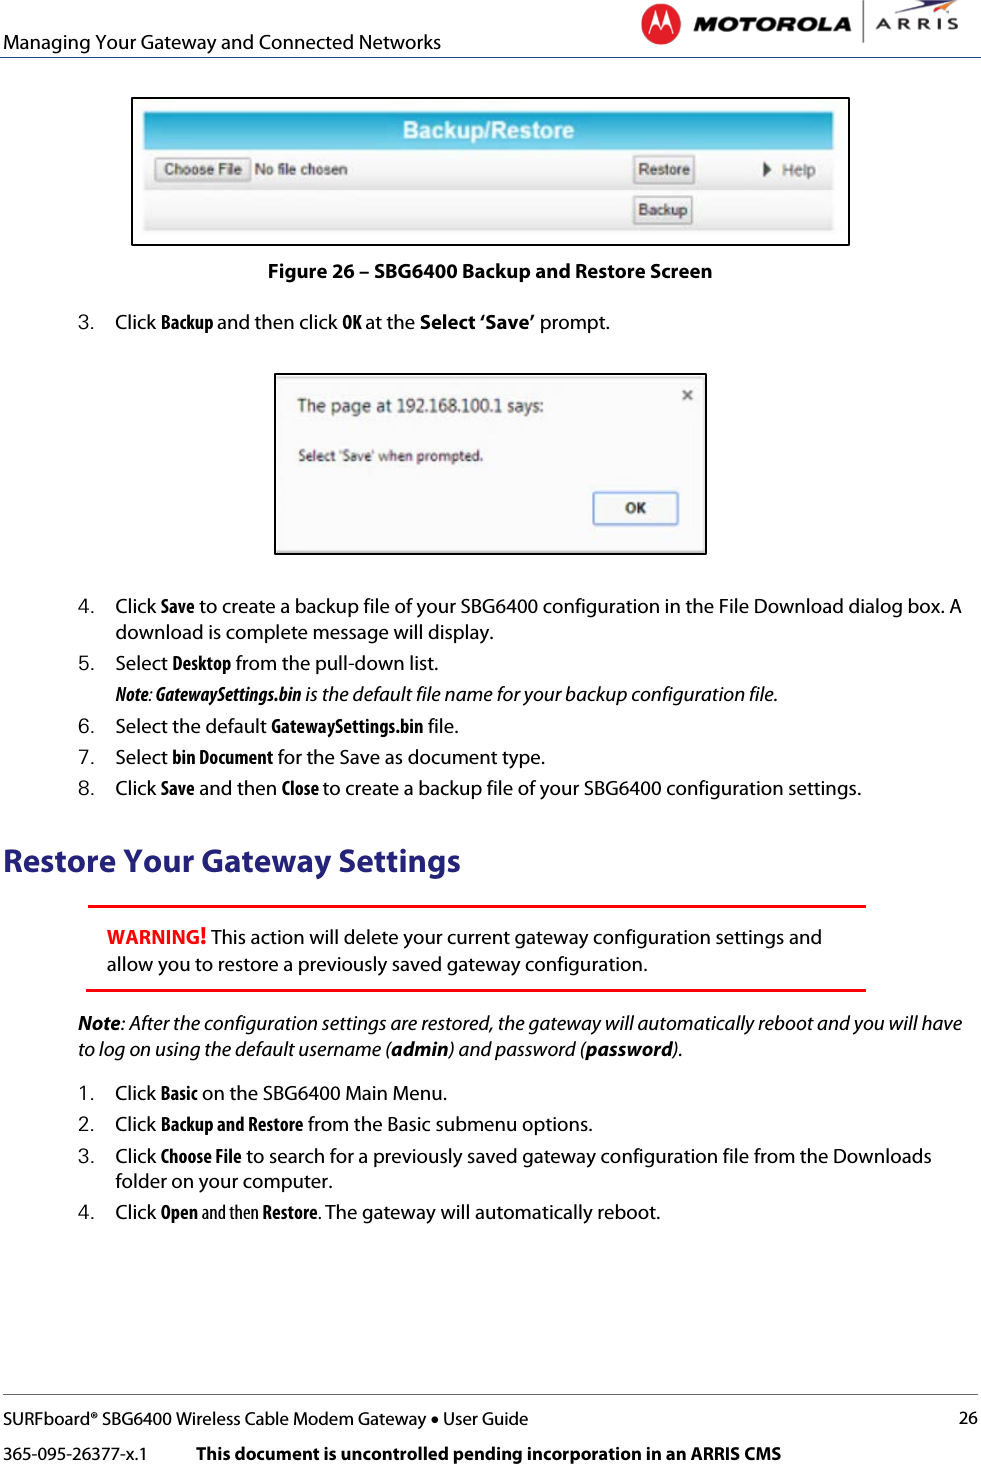 Managing Your Gateway and Connected Networks   SURFboard® SBG6400 Wireless Cable Modem Gateway • User Guide 26 365-095-26377-x.1            This document is uncontrolled pending incorporation in an ARRIS CMS   Figure 26 – SBG6400 Backup and Restore Screen 3. Click Backup and then click OK at the Select ‘Save’ prompt.   4. Click Save to create a backup file of your SBG6400 configuration in the File Download dialog box. A download is complete message will display. 5. Select Desktop from the pull-down list. Note: GatewaySettings.bin is the default file name for your backup configuration file. 6. Select the default GatewaySettings.bin file. 7. Select bin Document for the Save as document type. 8. Click Save and then Close to create a backup file of your SBG6400 configuration settings. Restore Your Gateway Settings WARNING! This action will delete your current gateway configuration settings and allow you to restore a previously saved gateway configuration. Note: After the configuration settings are restored, the gateway will automatically reboot and you will have to log on using the default username (admin) and password (password). 1. Click Basic on the SBG6400 Main Menu. 2. Click Backup and Restore from the Basic submenu options. 3. Click Choose File to search for a previously saved gateway configuration file from the Downloads folder on your computer.  4. Click Open and then Restore. The gateway will automatically reboot. 